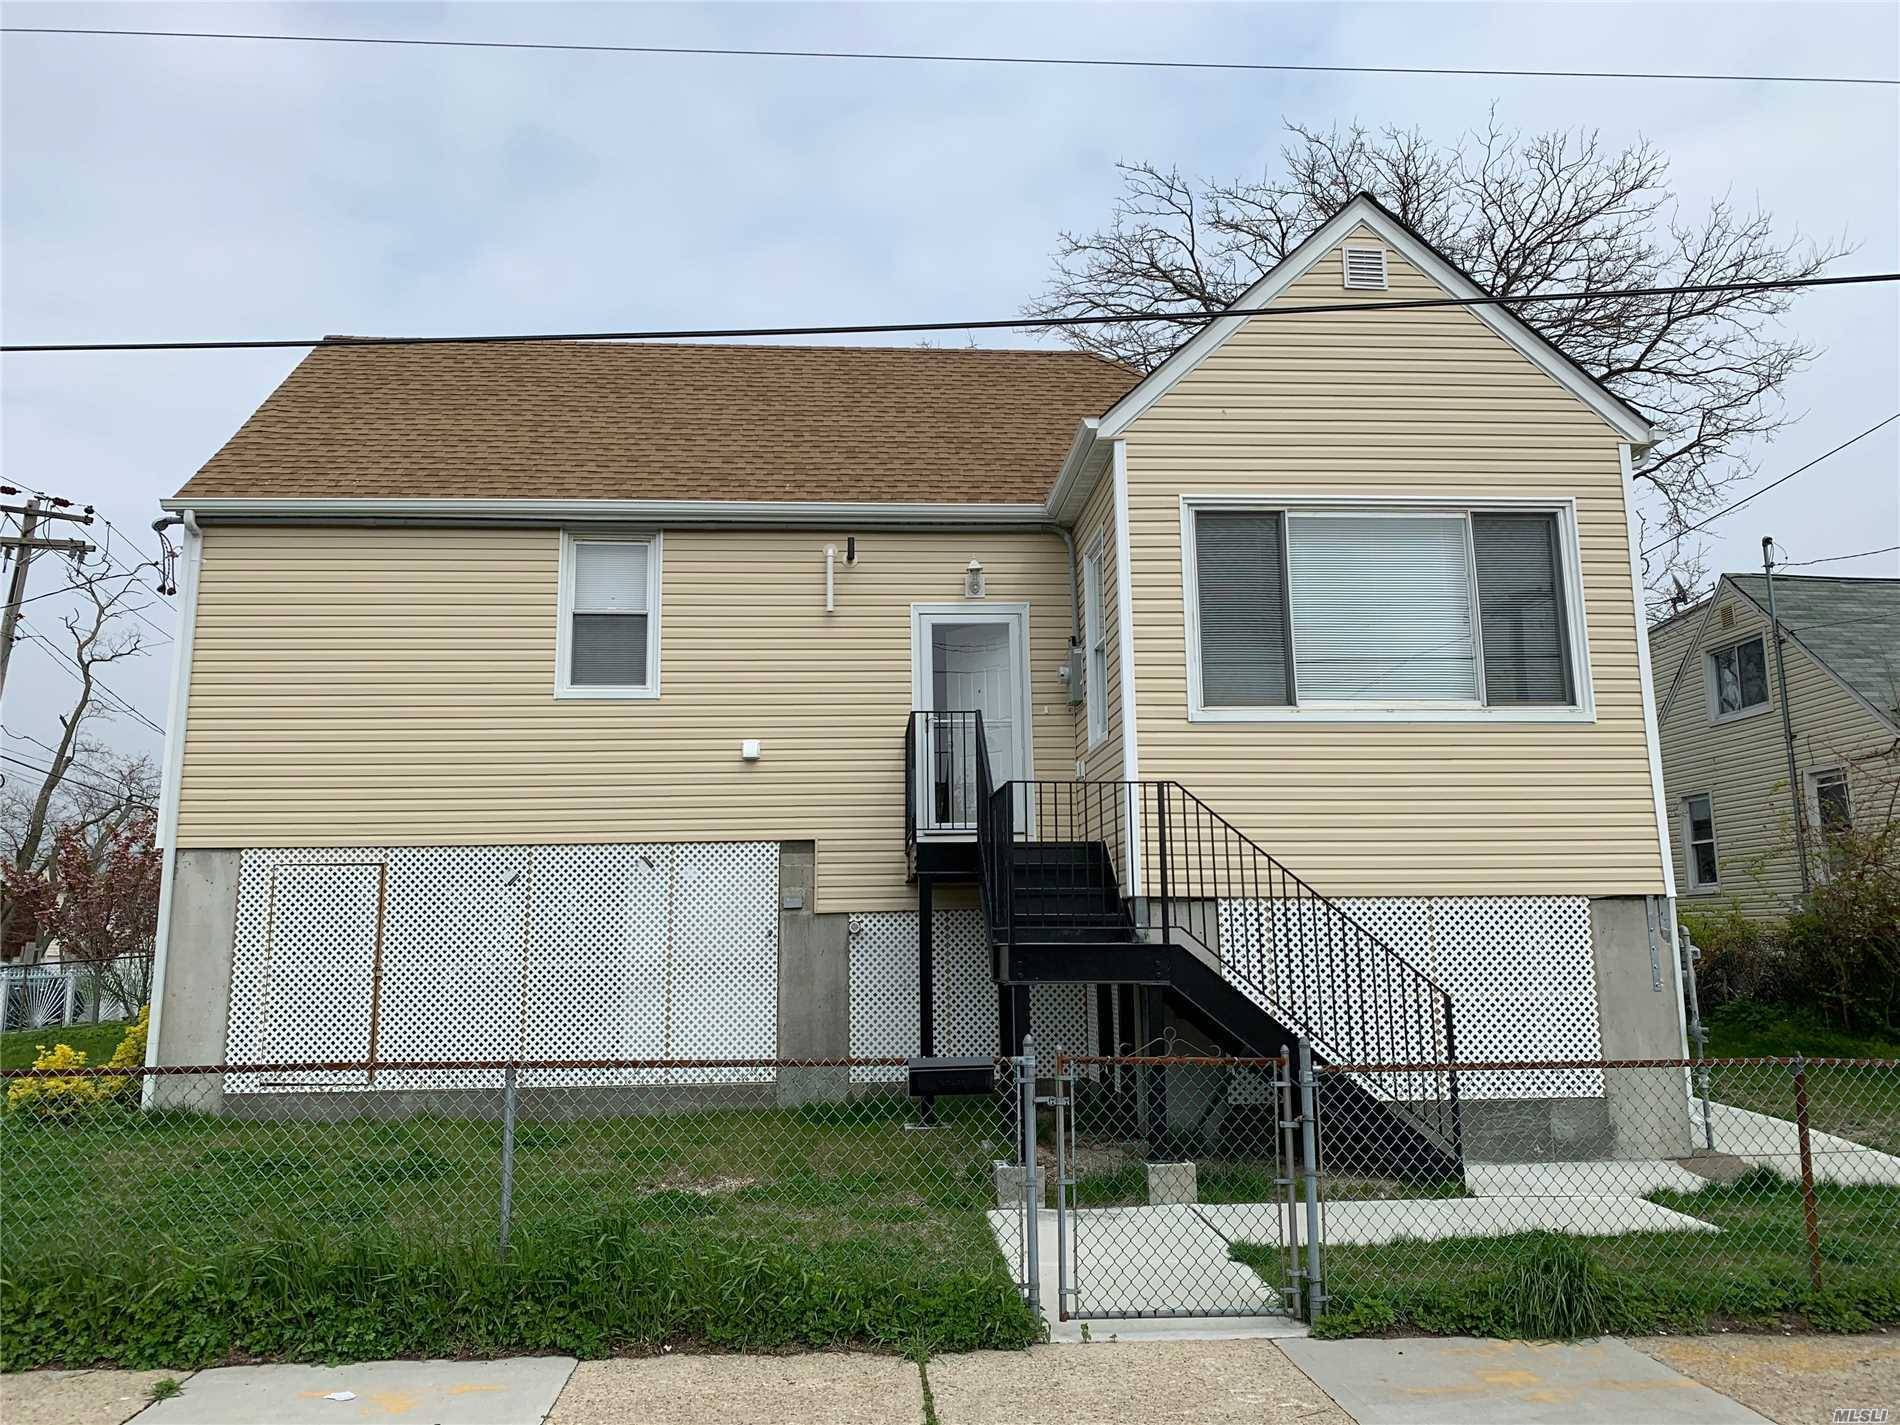 This detached 1 family home is located in the Arverne section of Rockaway, across from Jamaica Bay w water view !